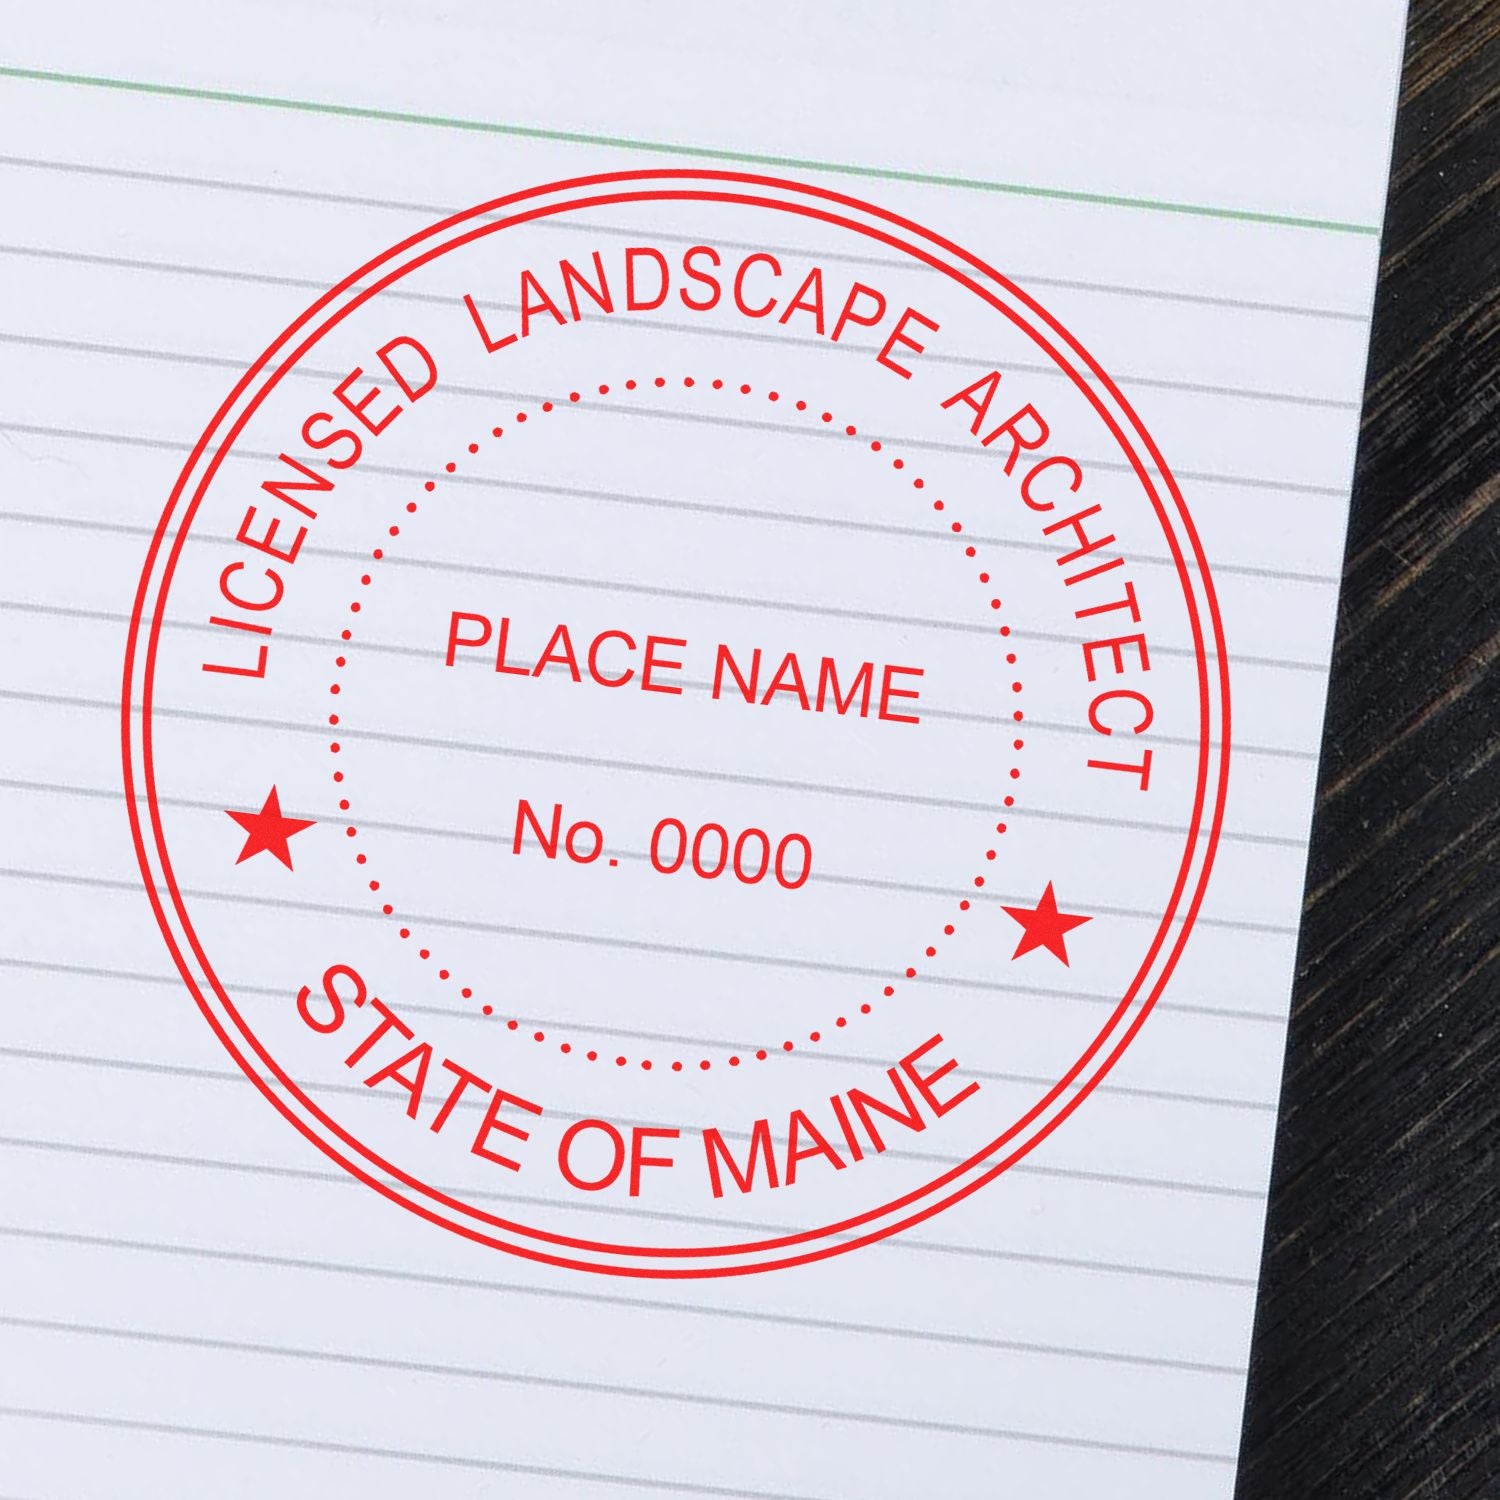 The main image for the Maine Landscape Architectural Seal Stamp depicting a sample of the imprint and electronic files